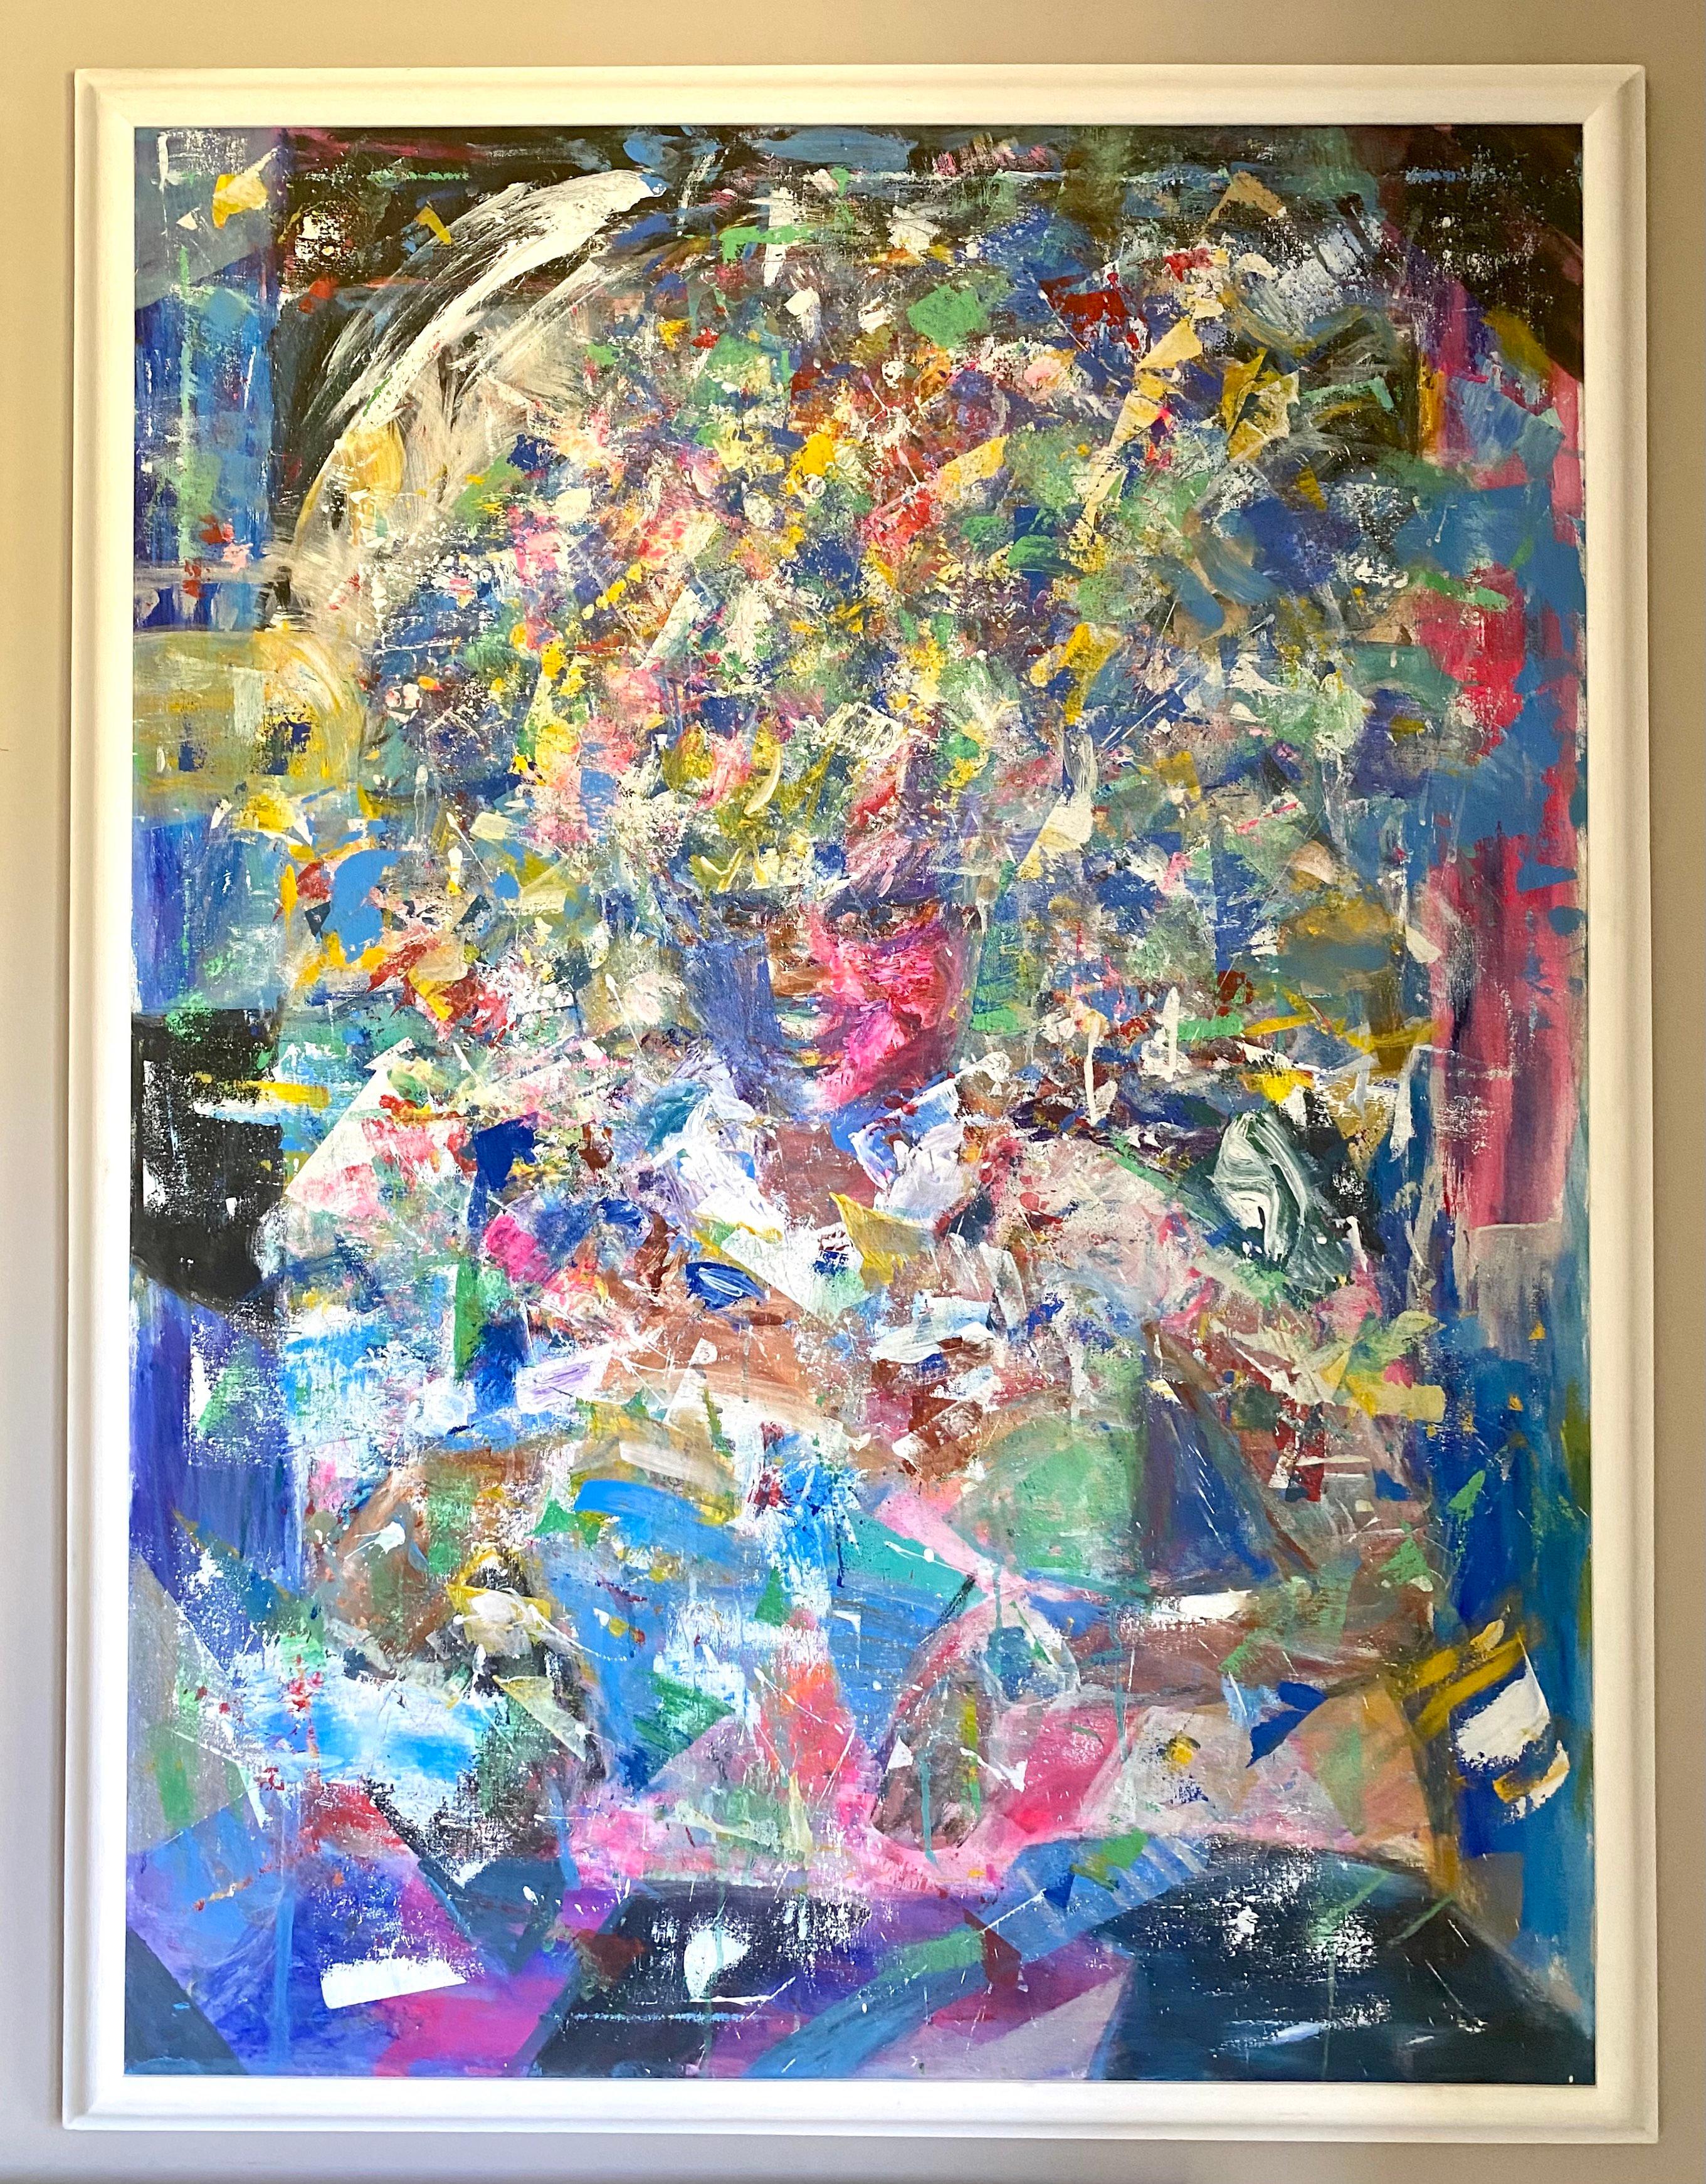 Rio Carnival - Abstract Expressionist Painting by Fereshteh Stoecklein 